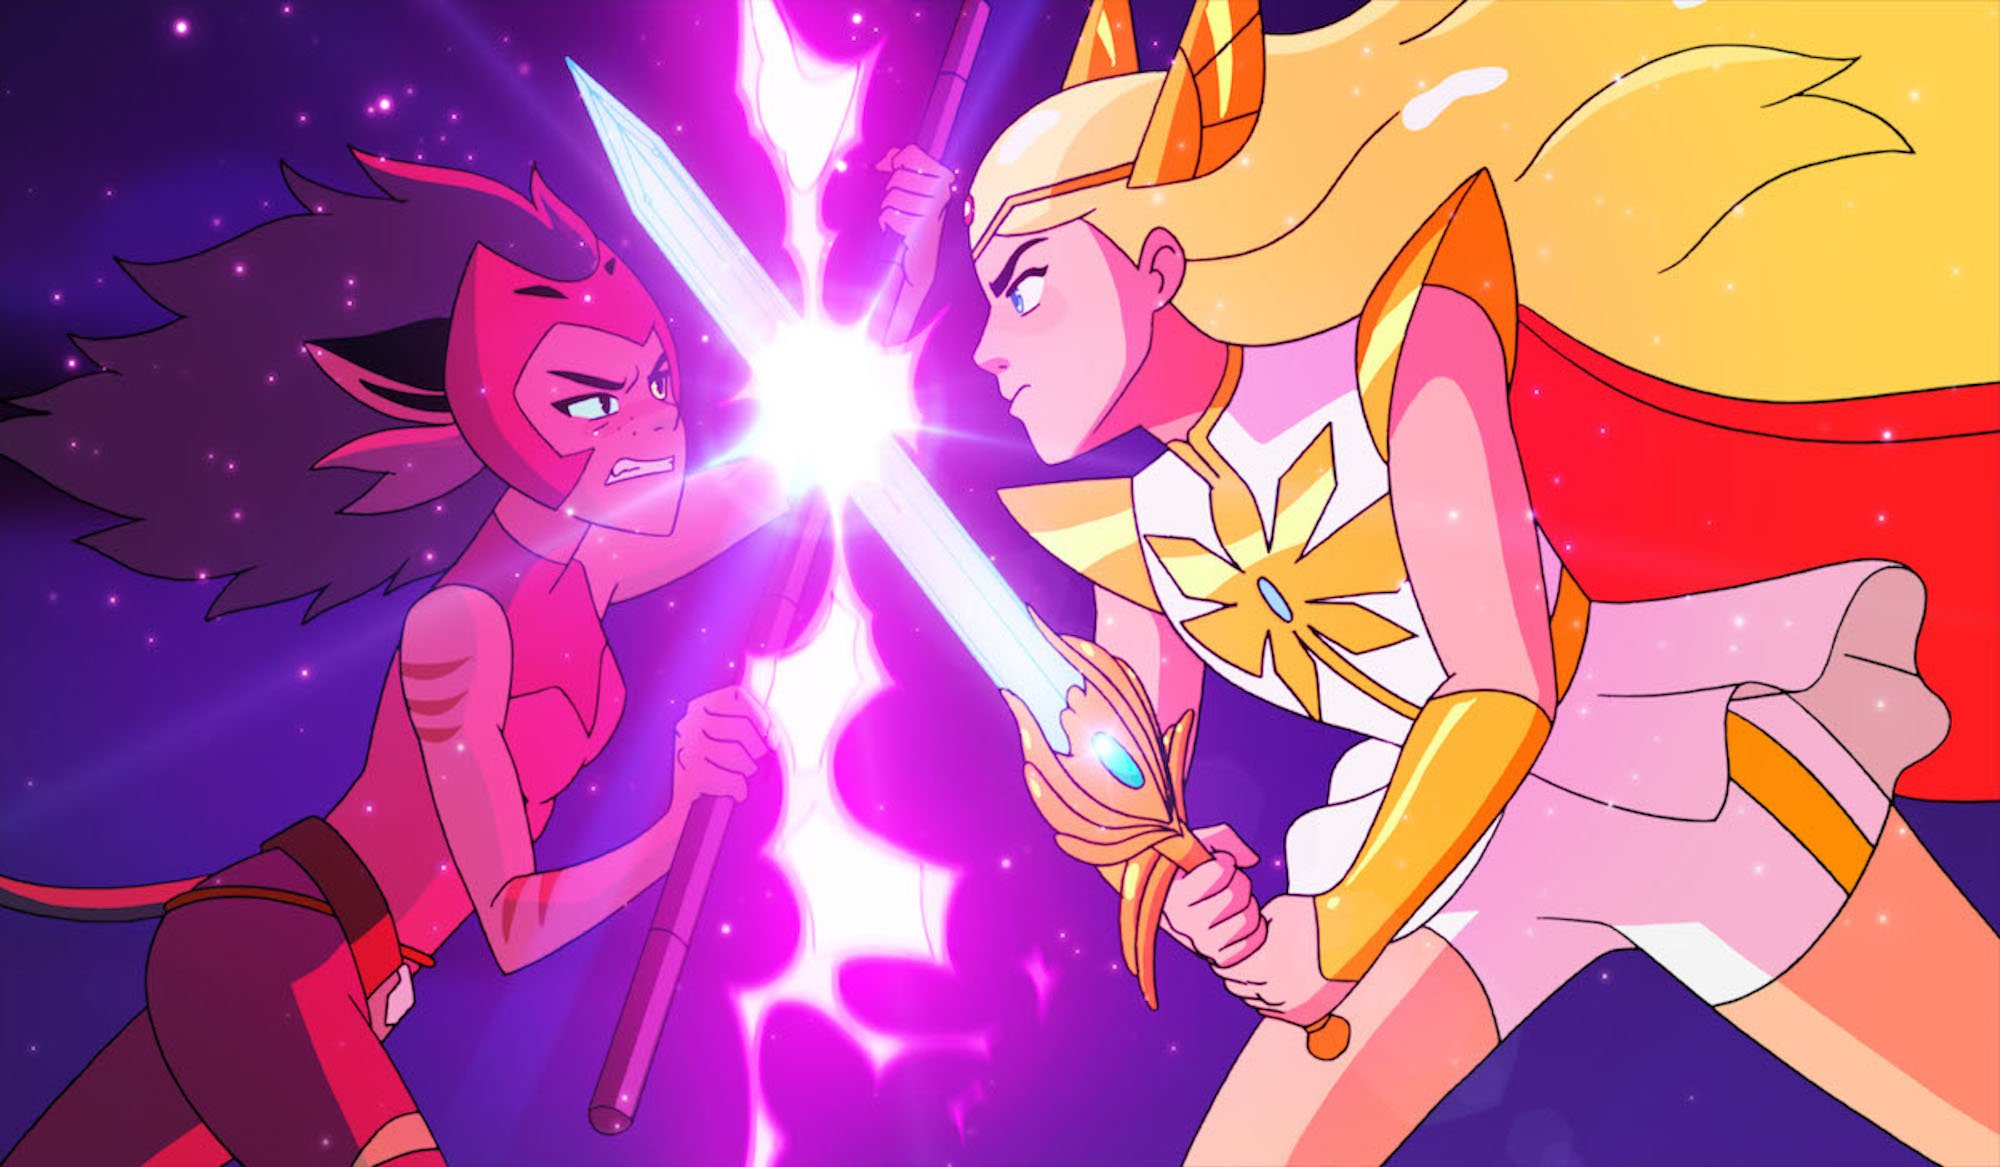 5 Adora and Catra Moments That Show Their Evolving Relationship in ‘She-Ra and the Princesses of Power’